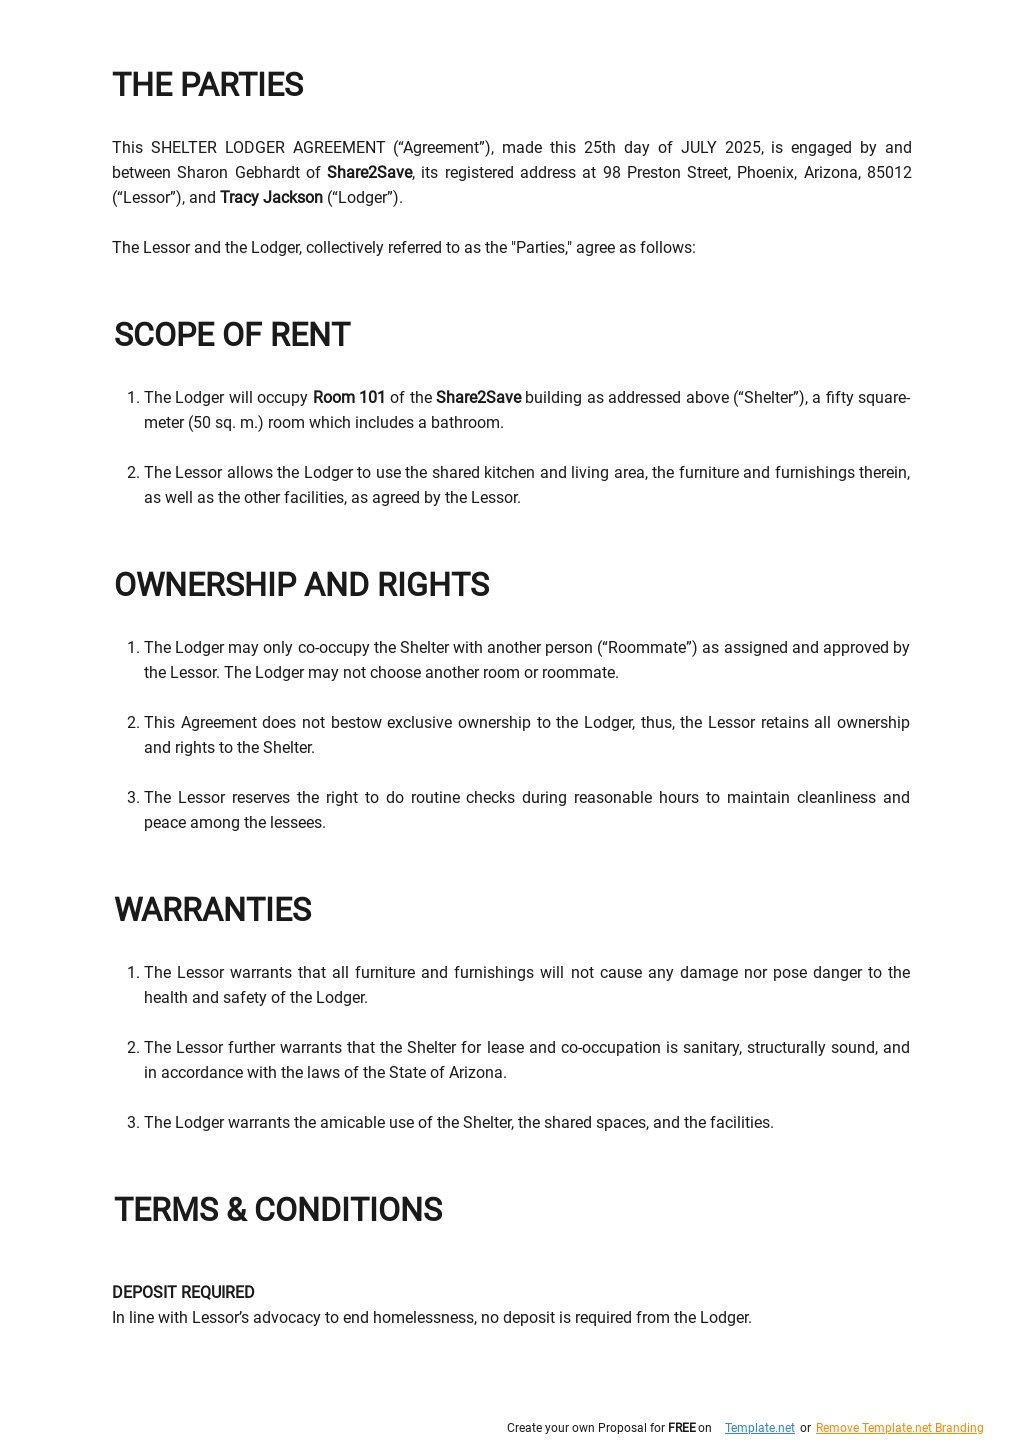 Shelter Lodger Agreement Template - Google Docs, Word  Template.net Within termination of lodger agreement template